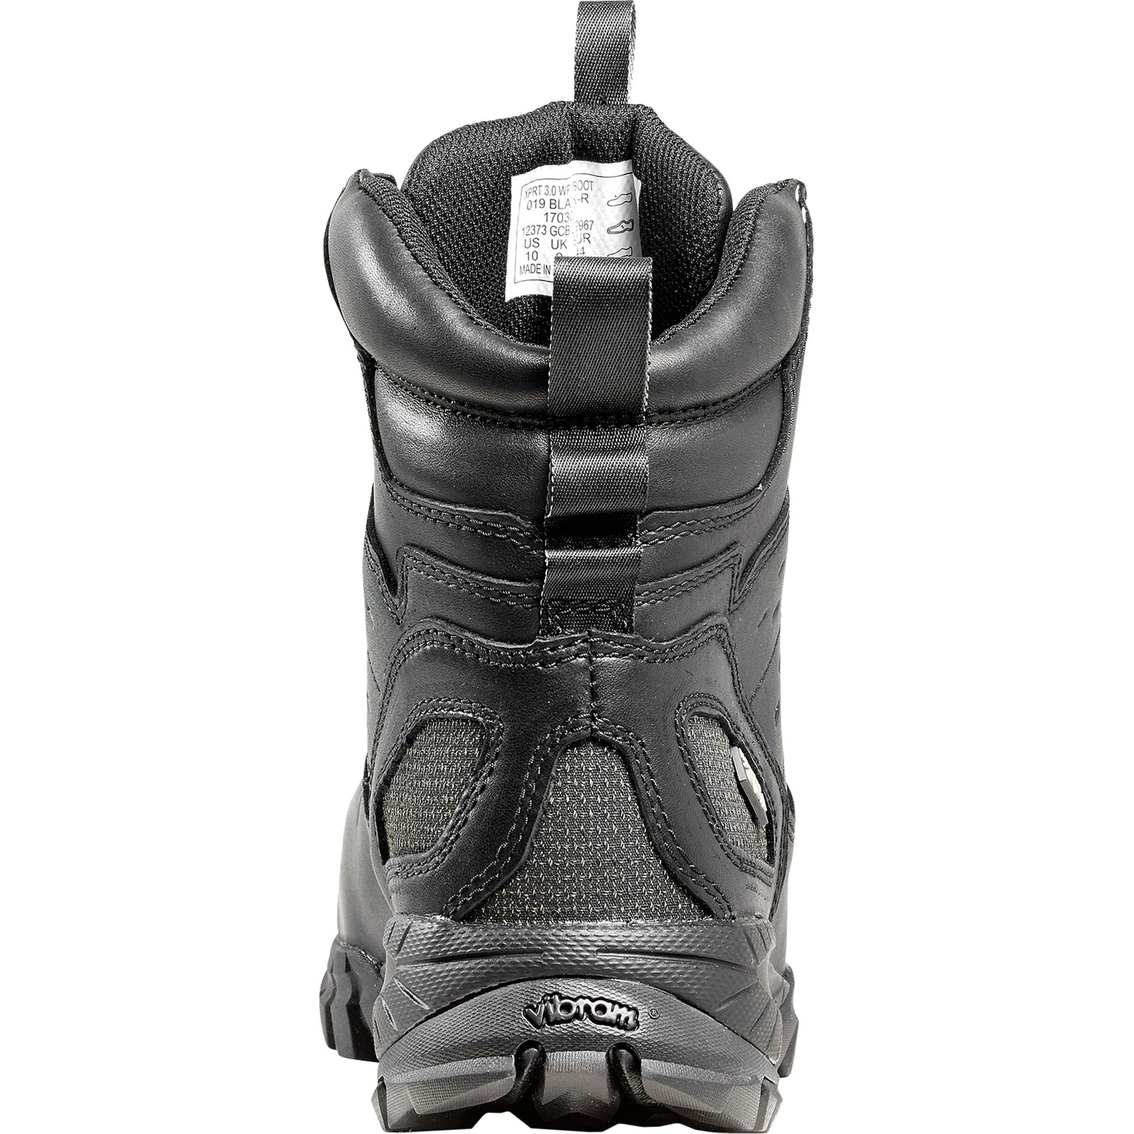 5.11 Men's Xprt 3.0 Black 6 in. Boots - Image 7 of 8